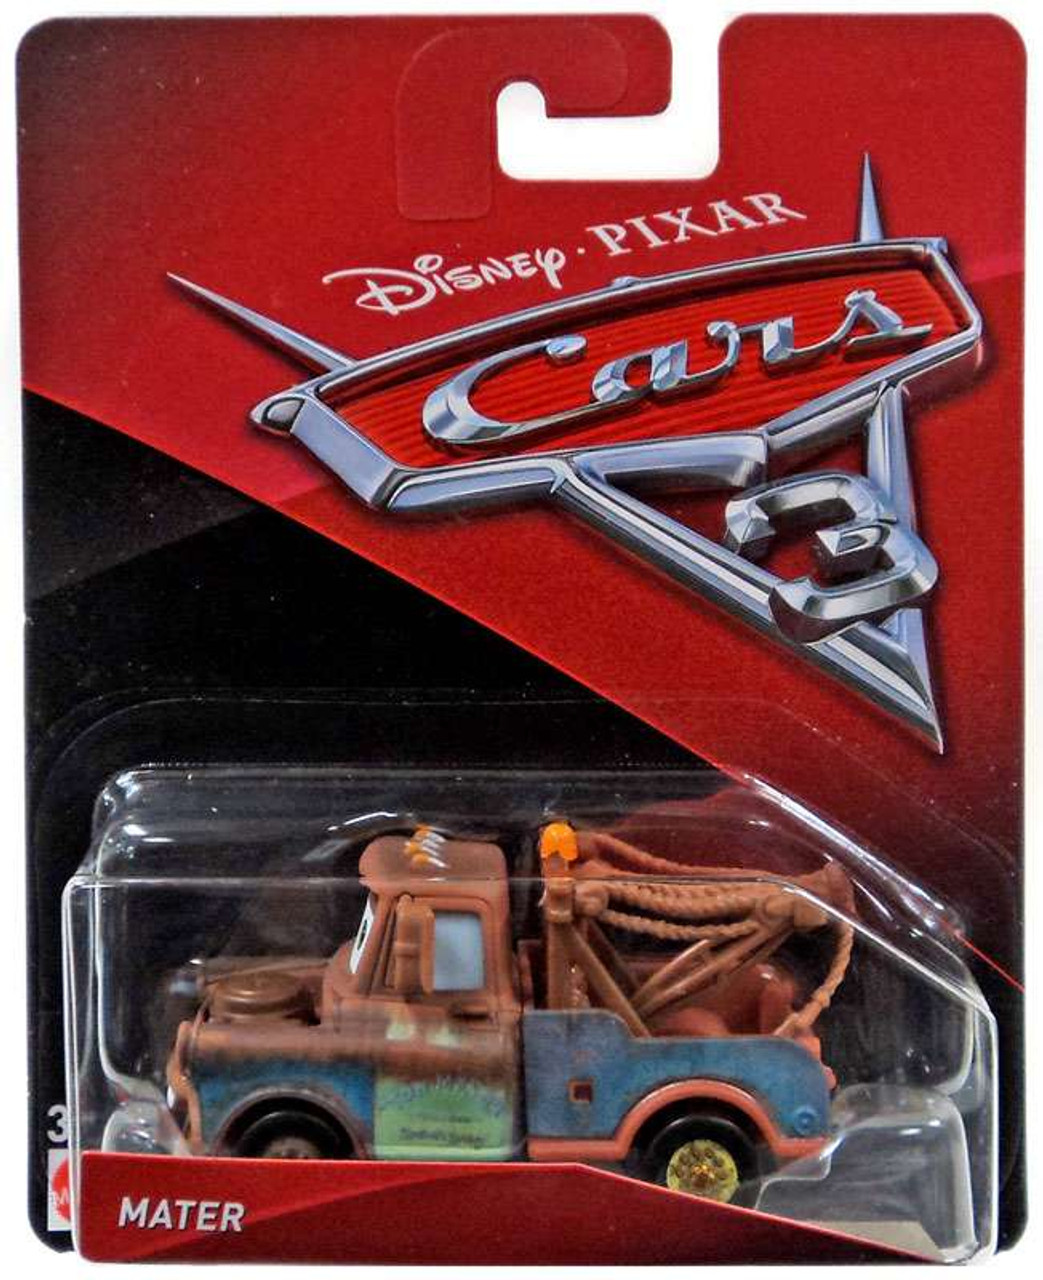 mater from cars toys